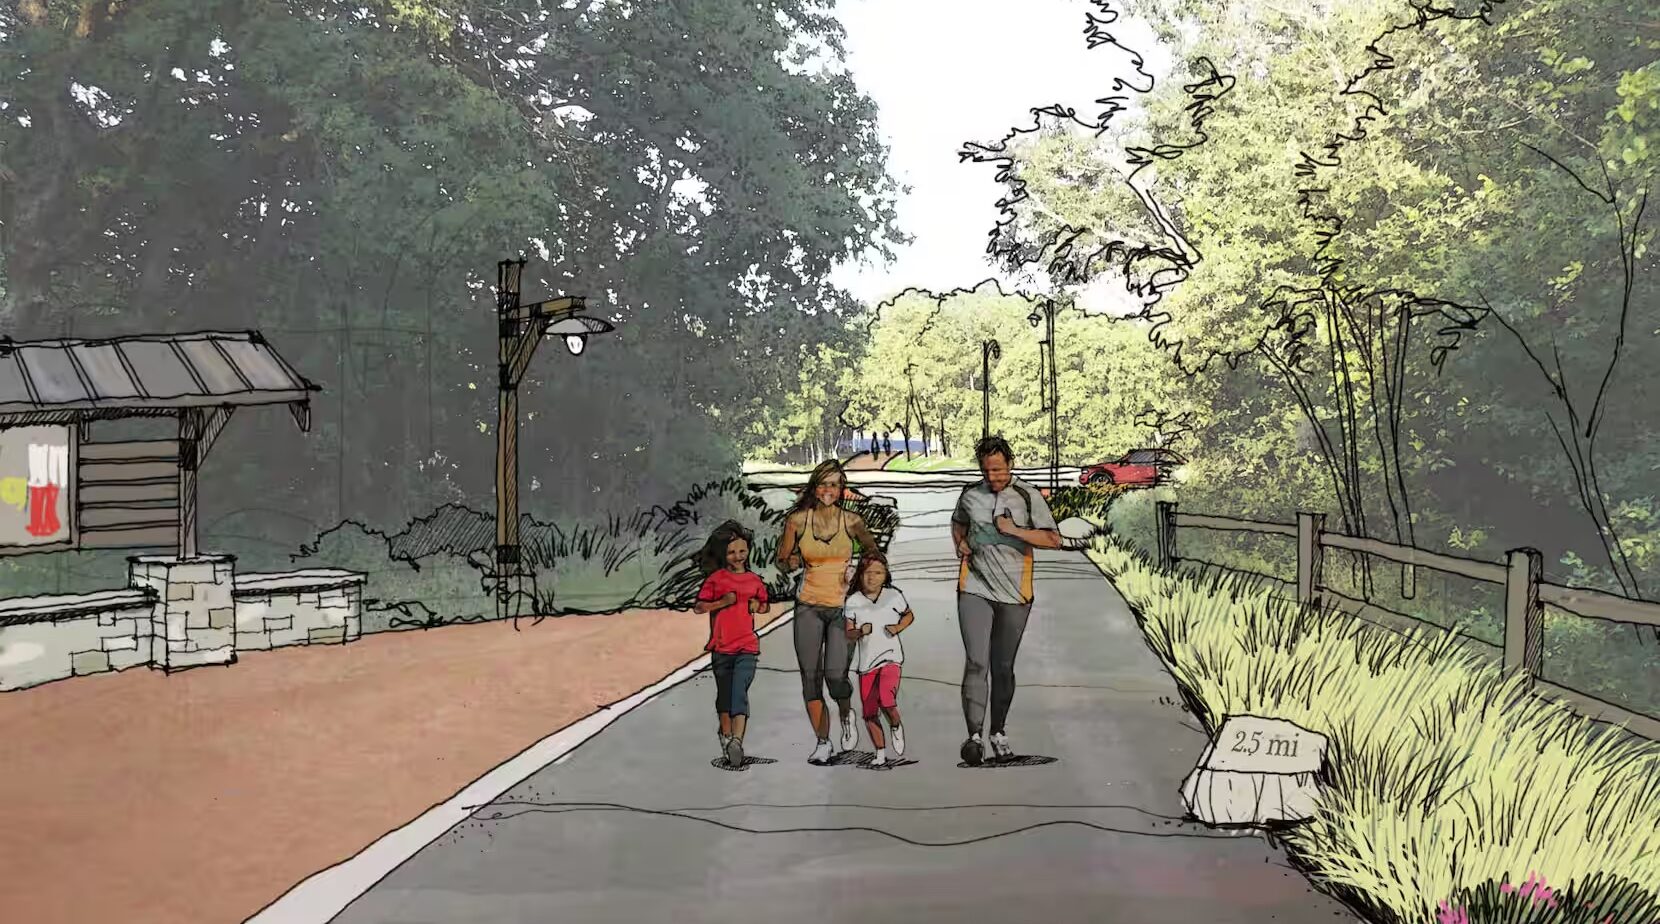 The bond package will allow for multiple opportunities to access matching funds from federal and philanthropic grants and private donations that will substantially magnify the scope and impact of projects like the Five Mile Creek Greenbelt, write Arun Agarwal, Jeanne Johnson Phillips and Tim Powers.(Trust for Public Land)